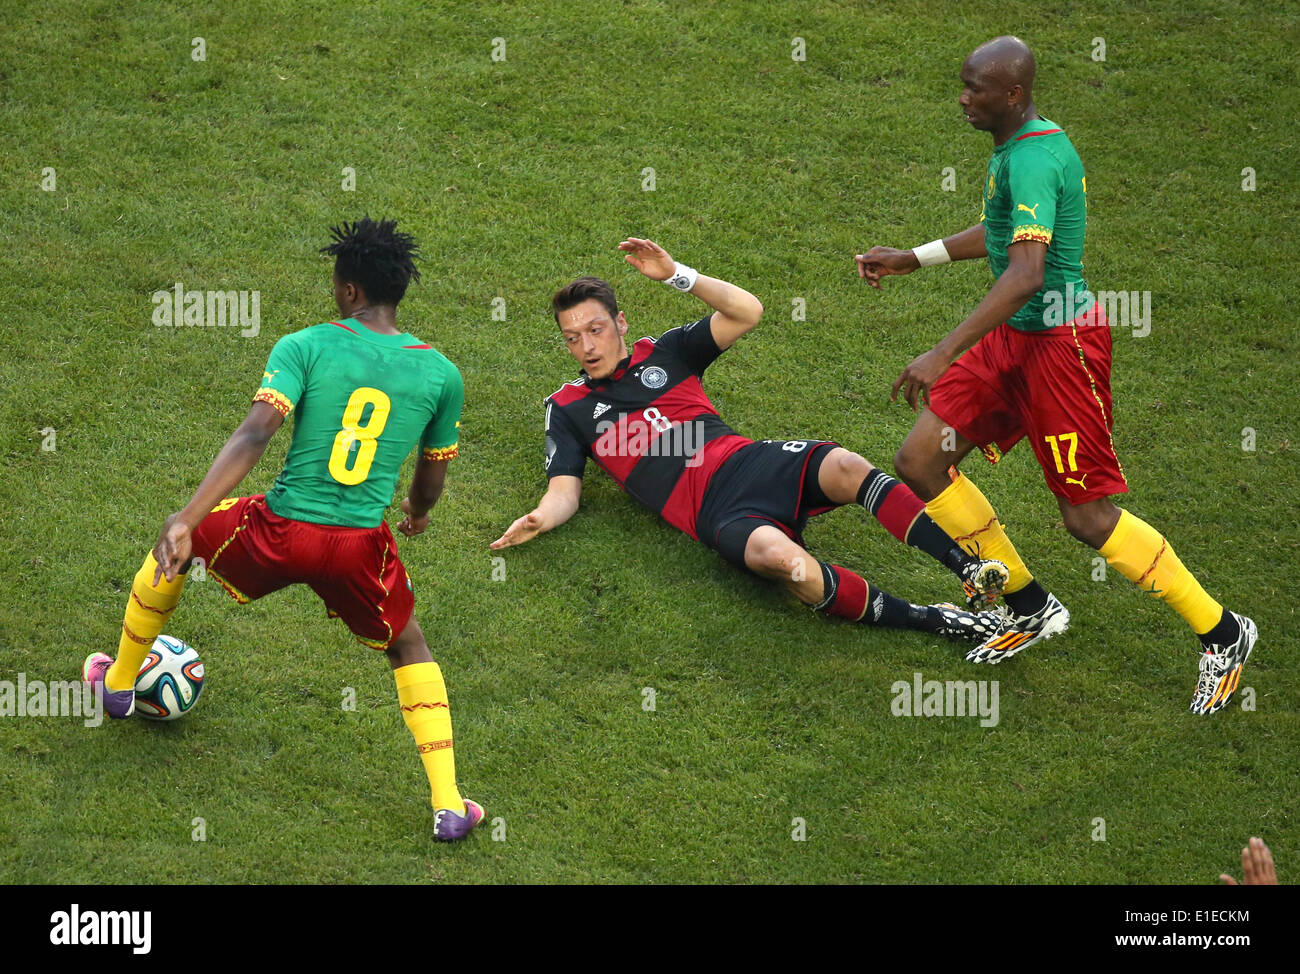 Germany's Mesut Oezil (C) in action against Cameroon's Benjamin Moukandjo (L) and Stephane Mbia  during the friendly soccer match between Germany and Cameroon at the Borussia Park stadium in Moenchengladbach, Germany, 01 June 2014. Photo: Rolf Vennenbernd/dpa Stock Photo